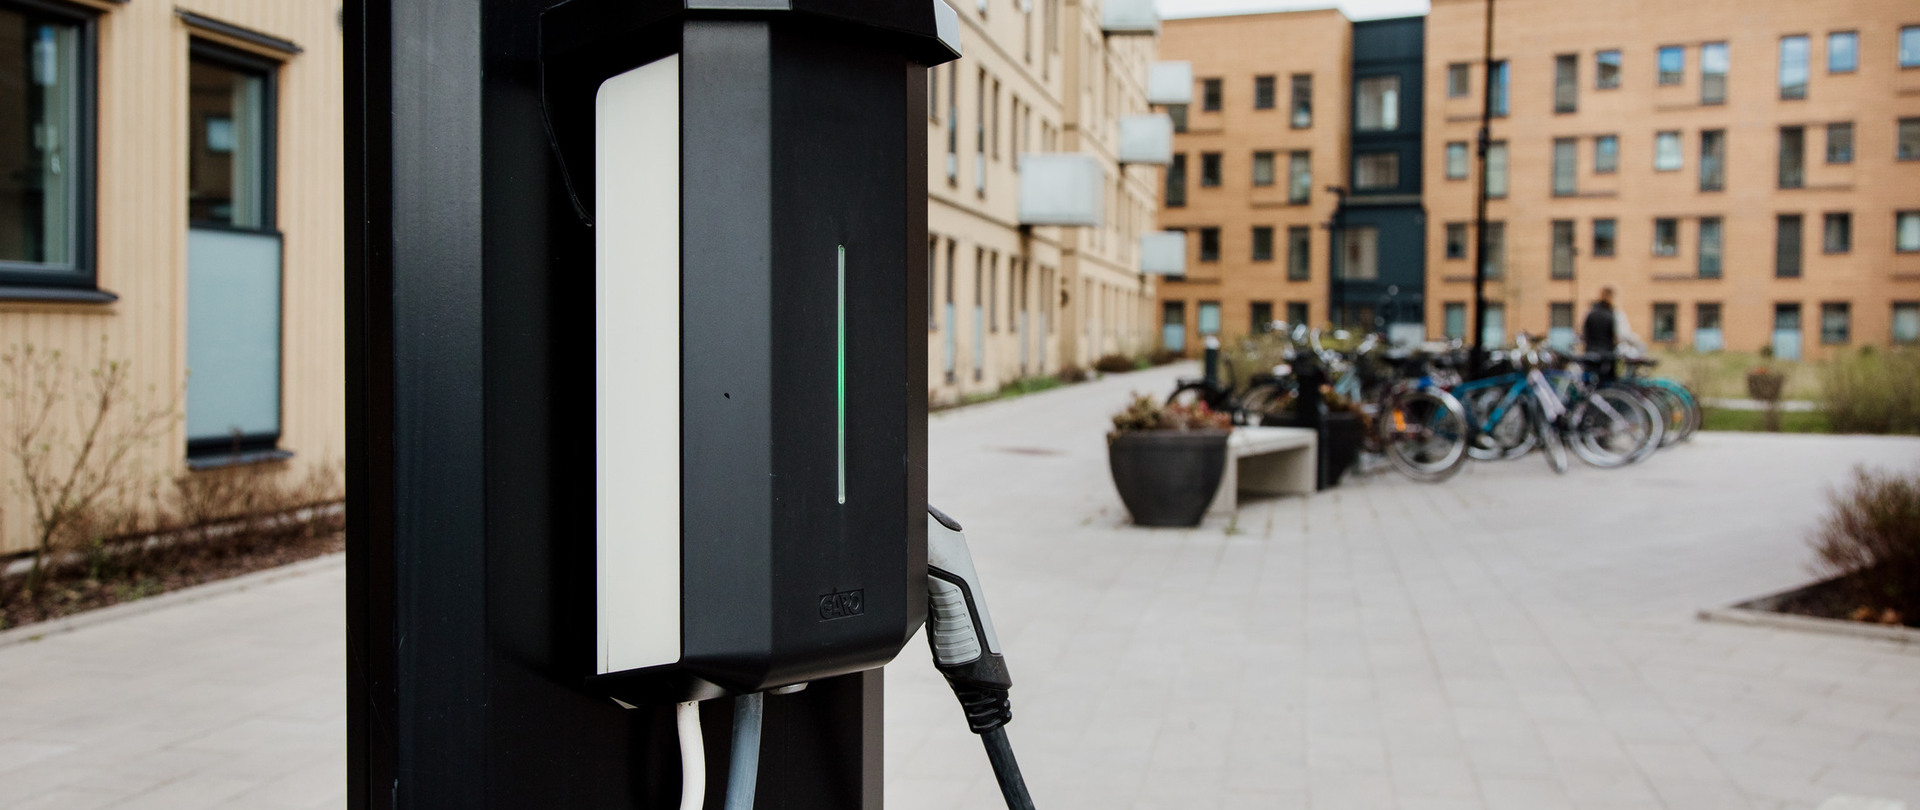 Electric car charging for apartments buildings